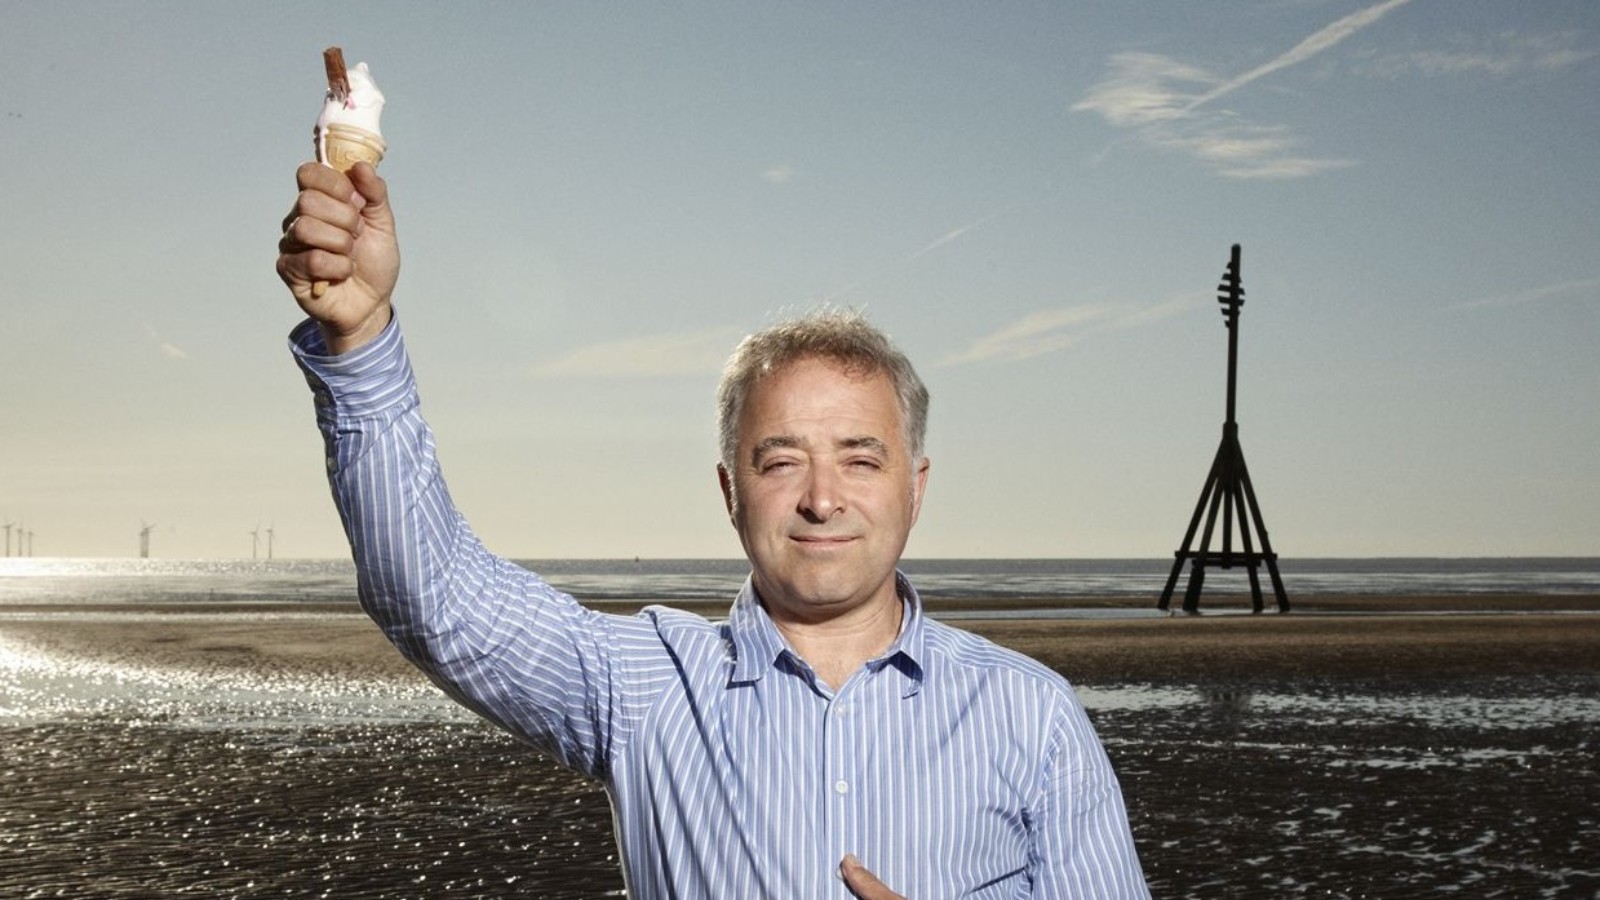 Screenwriter and Novelist Frank Cottrell Boyce stands on a beach against a blue sky holding an ice cream cone with a flake in the air.